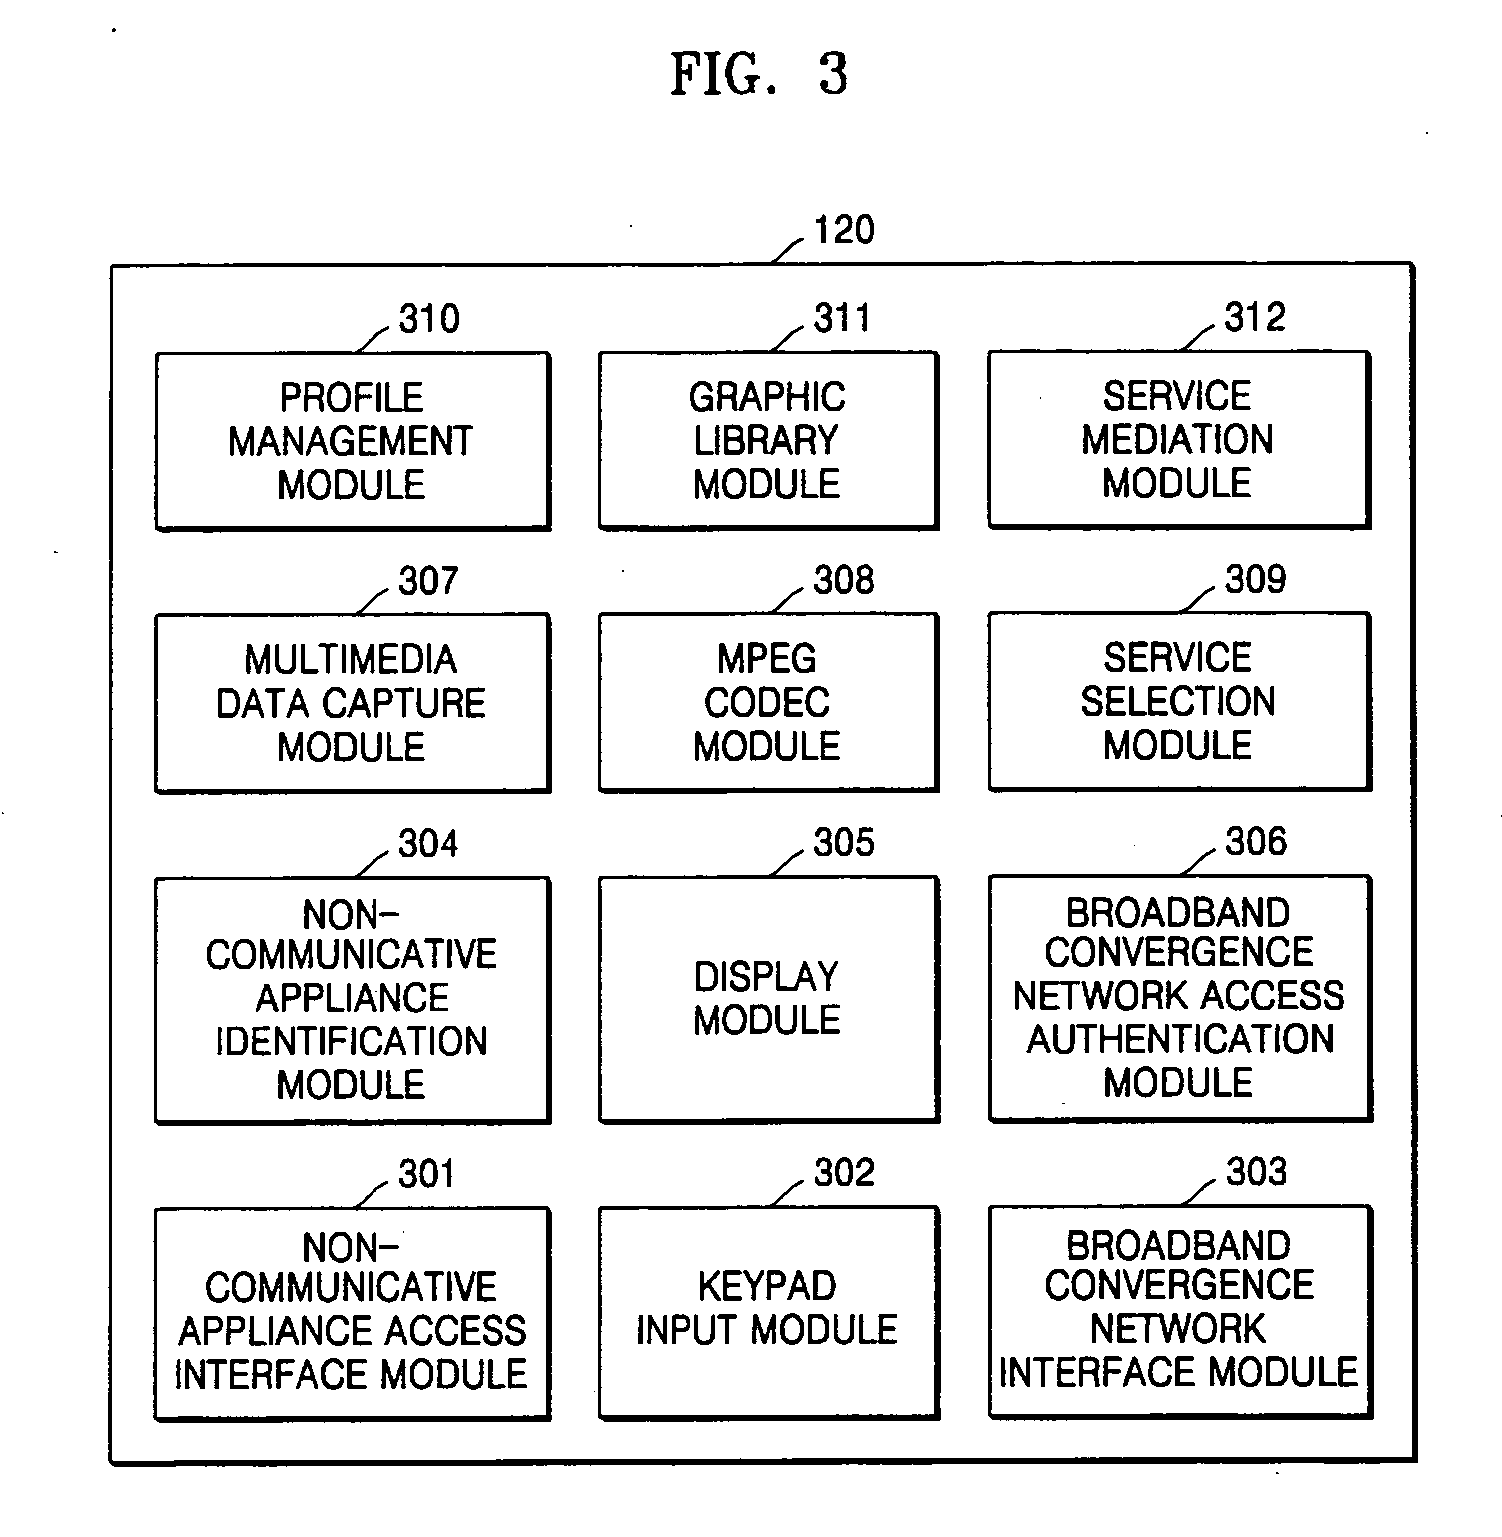 System for mediating convergence services of communication and broadcasting using non-communicative appliance